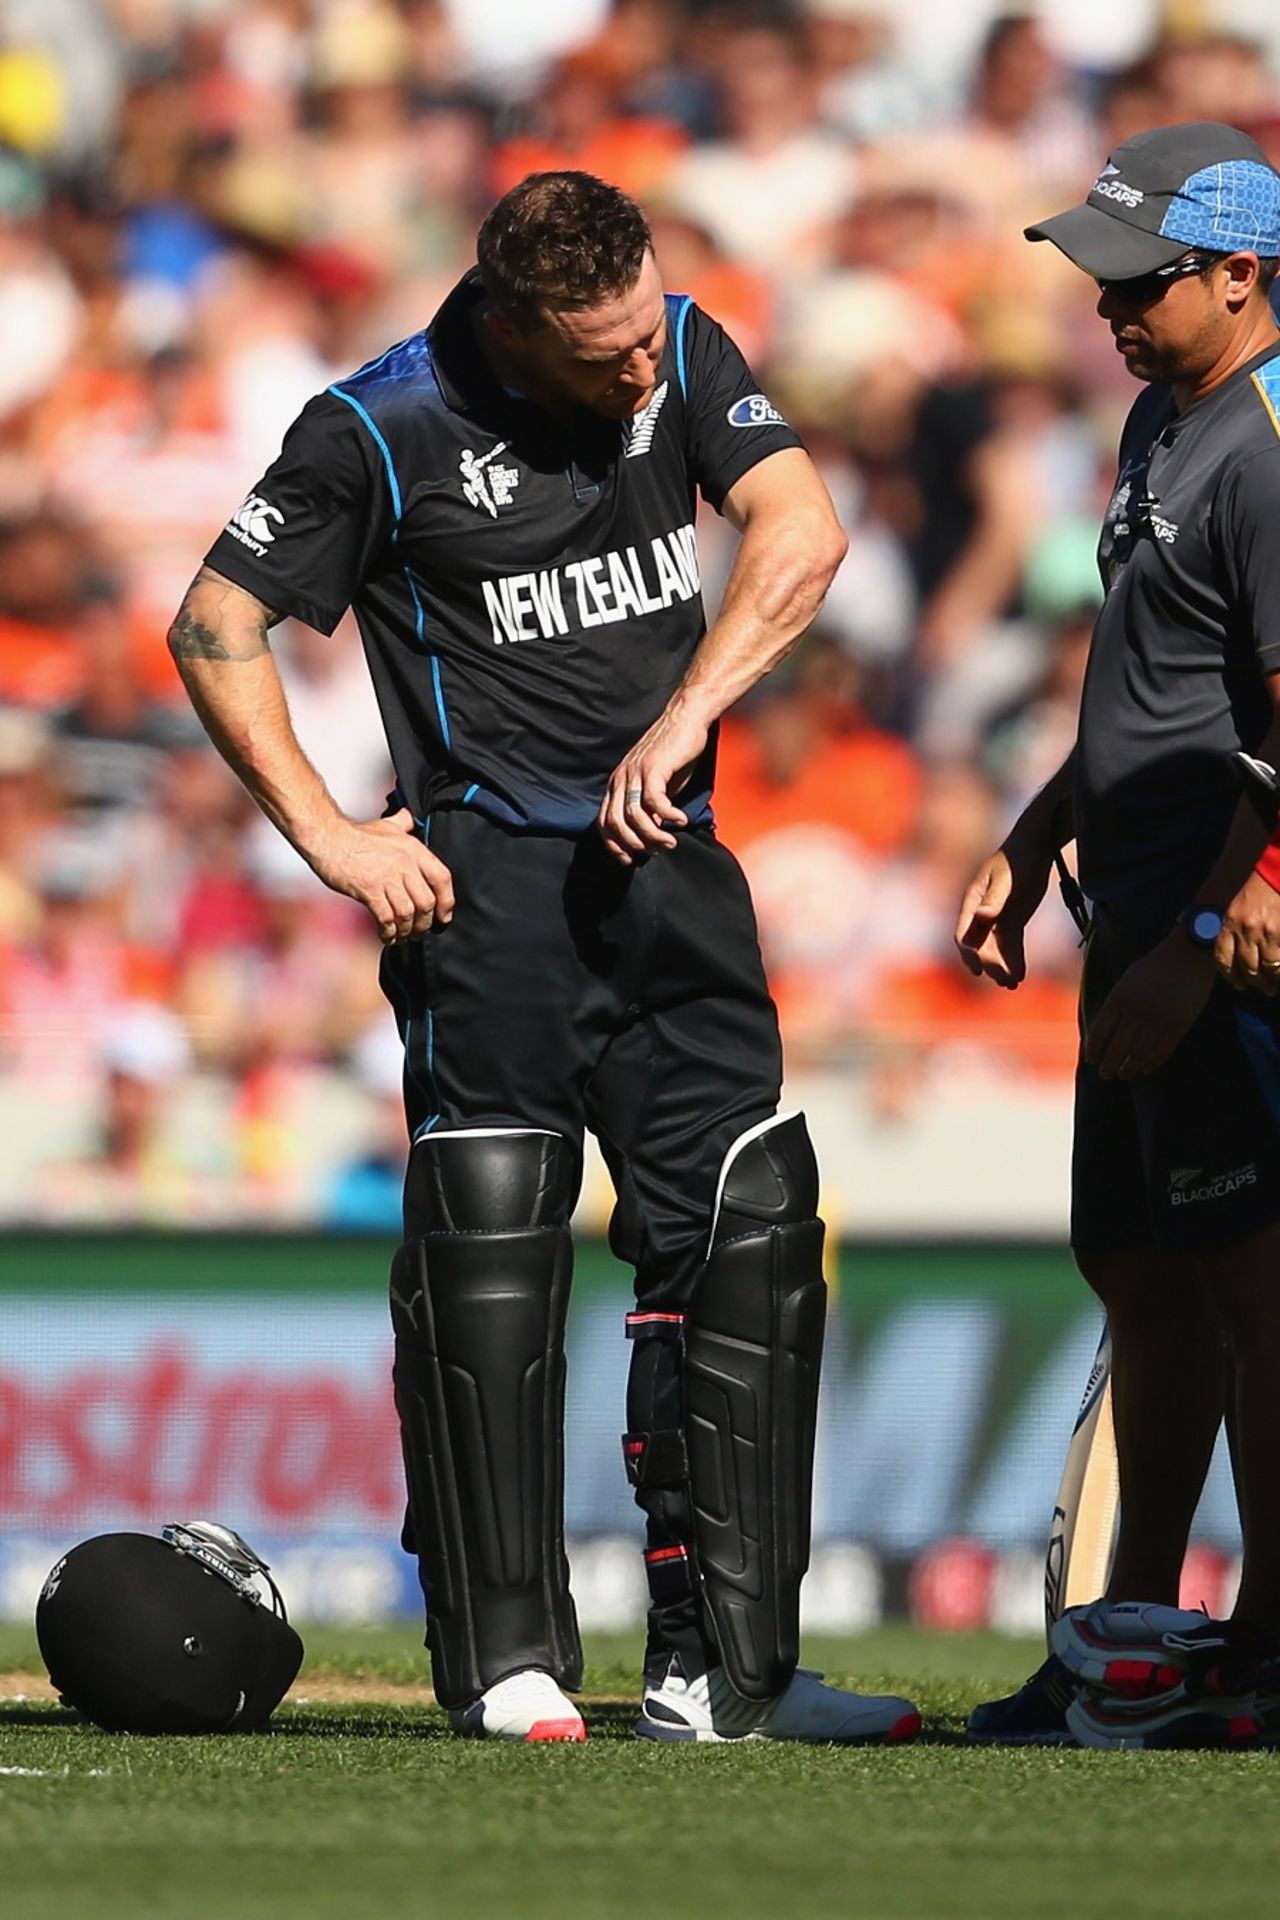 Brendon McCullum examines his arm after taking a hit, New Zealand v Australia, World Cup 2015, Group A, Auckland, February 28, 2015